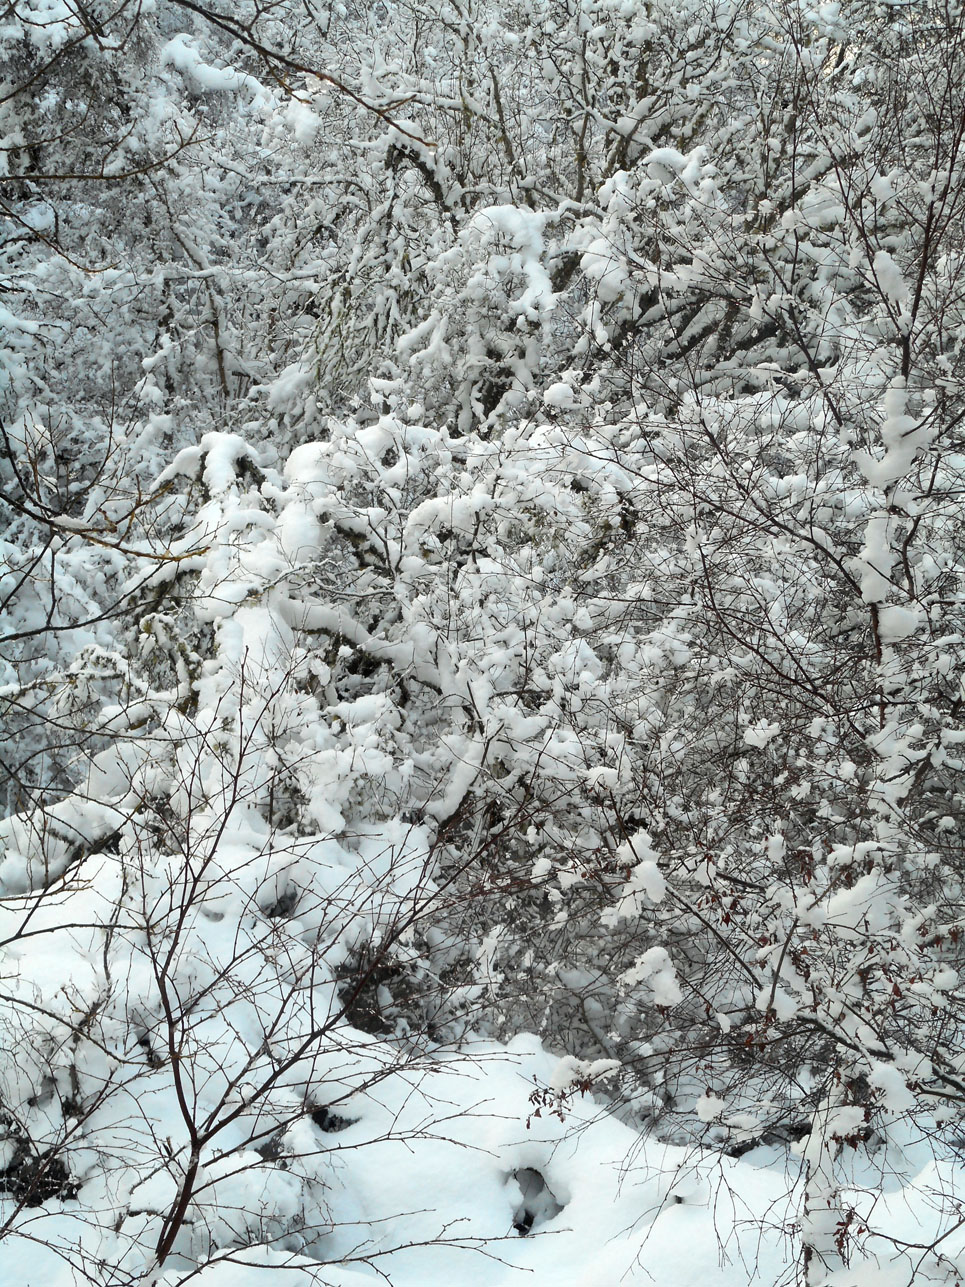 03 Snow piled up on the deciduous tree branches